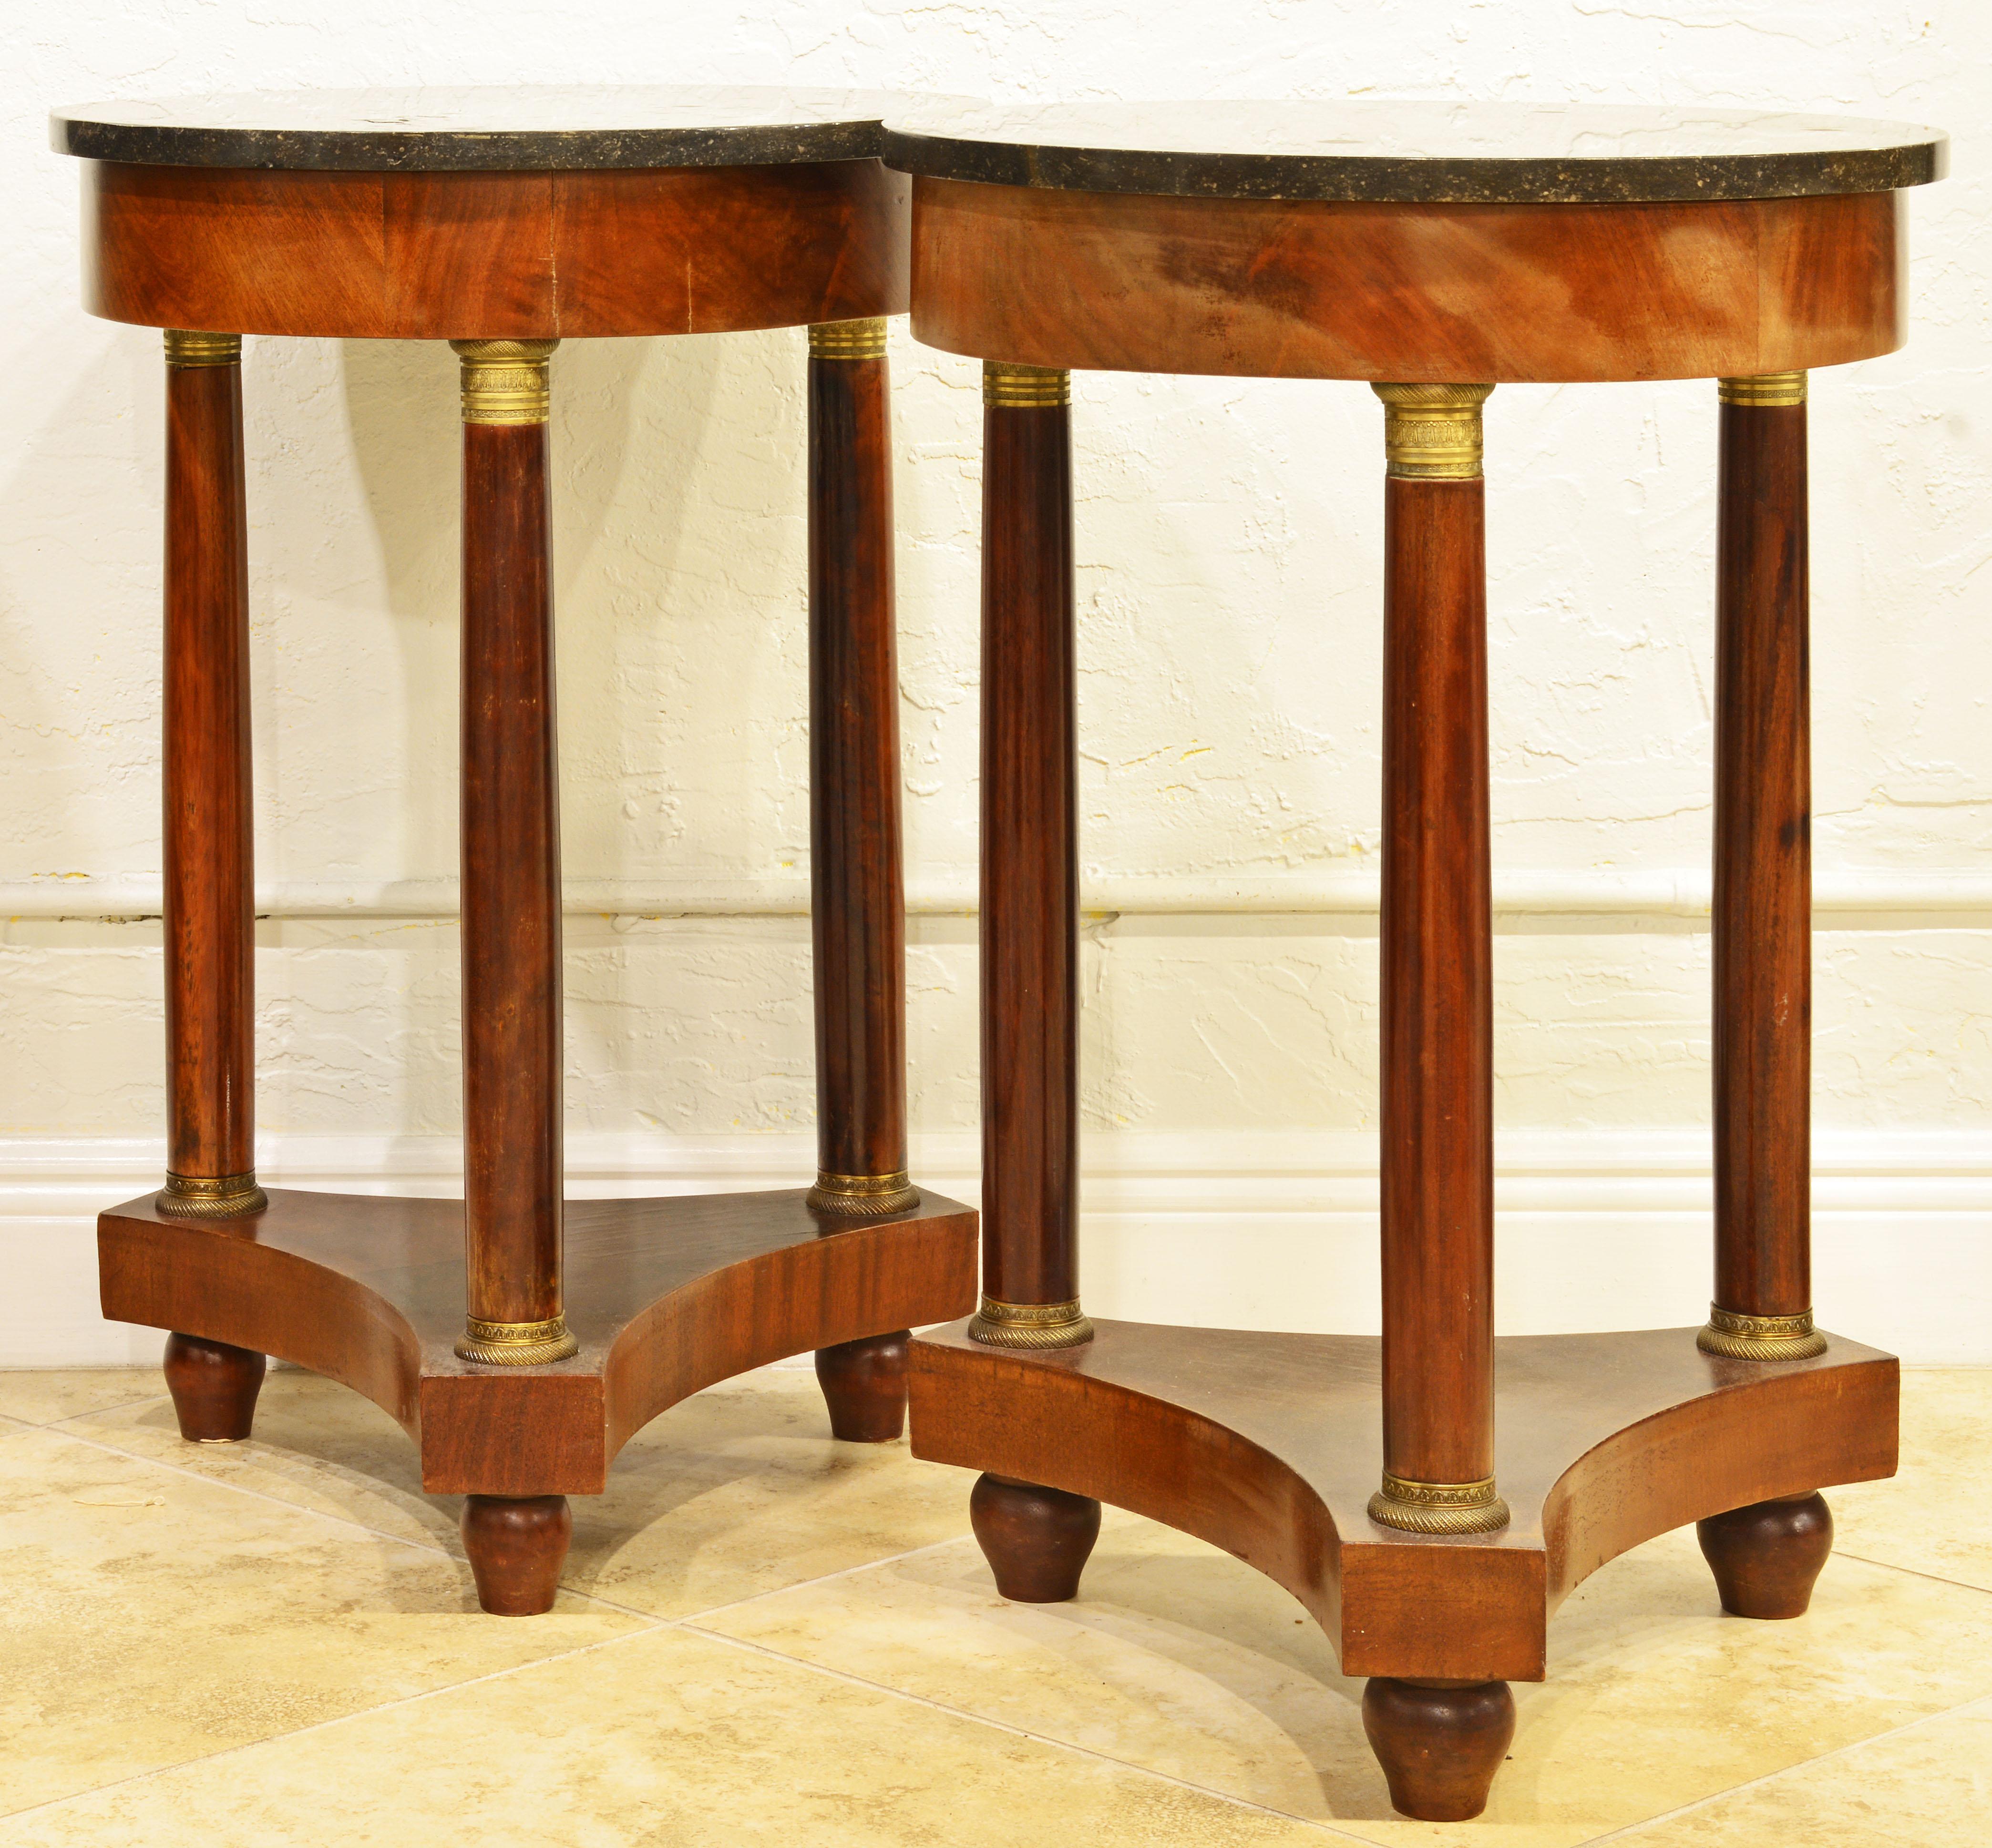 A lovely pair of French Empire style round mahogany marble-top tables on three gilt bronze mounted columns and a shaped base with turned feet.